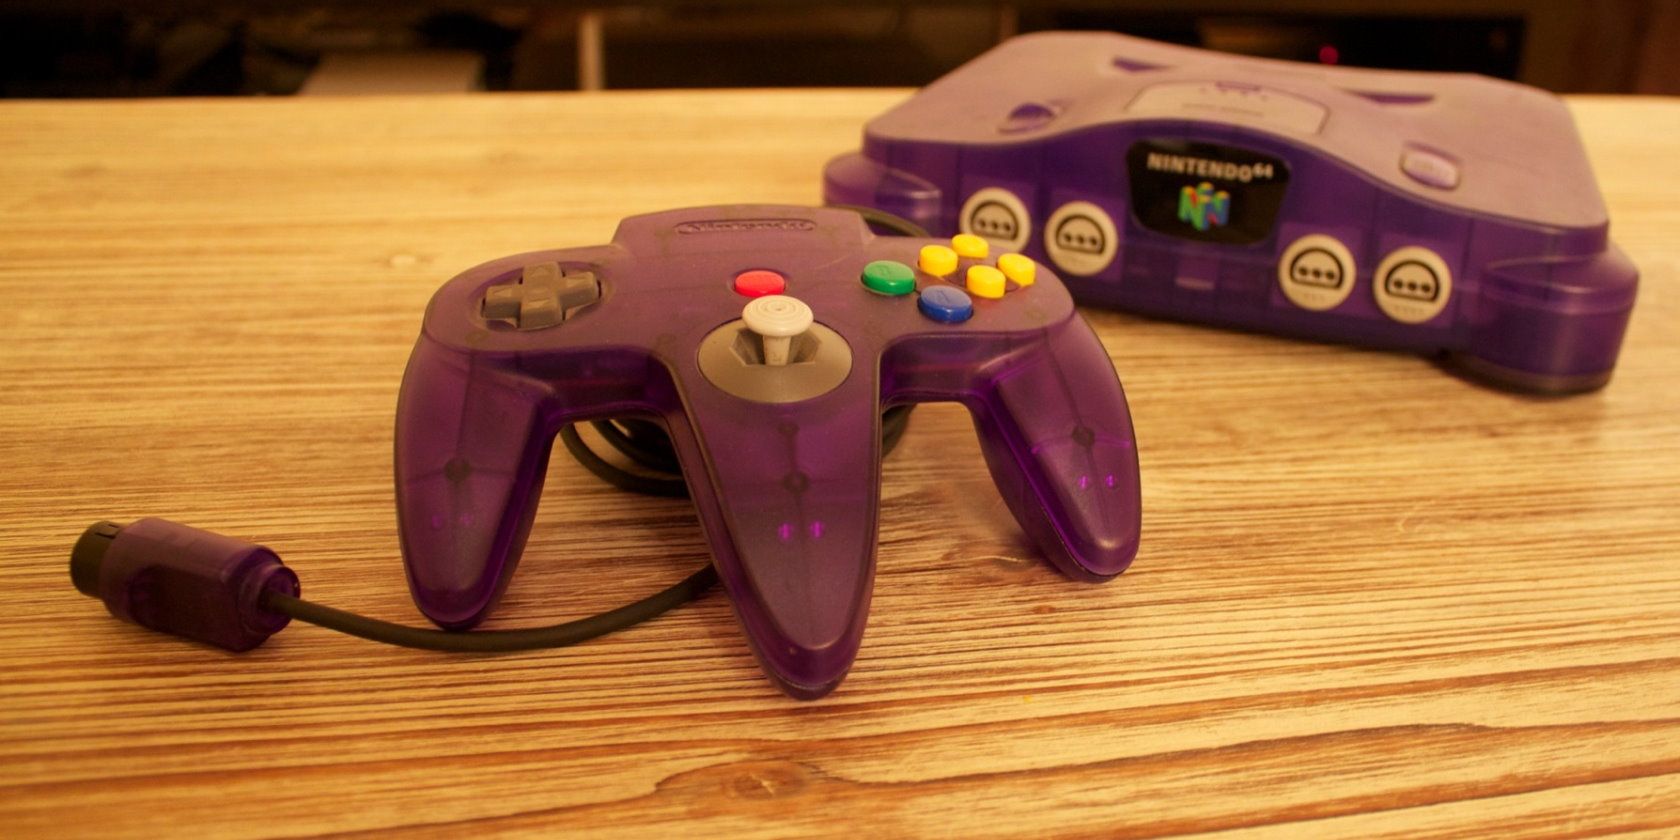 Purple Nintendo 64 console and controller on table